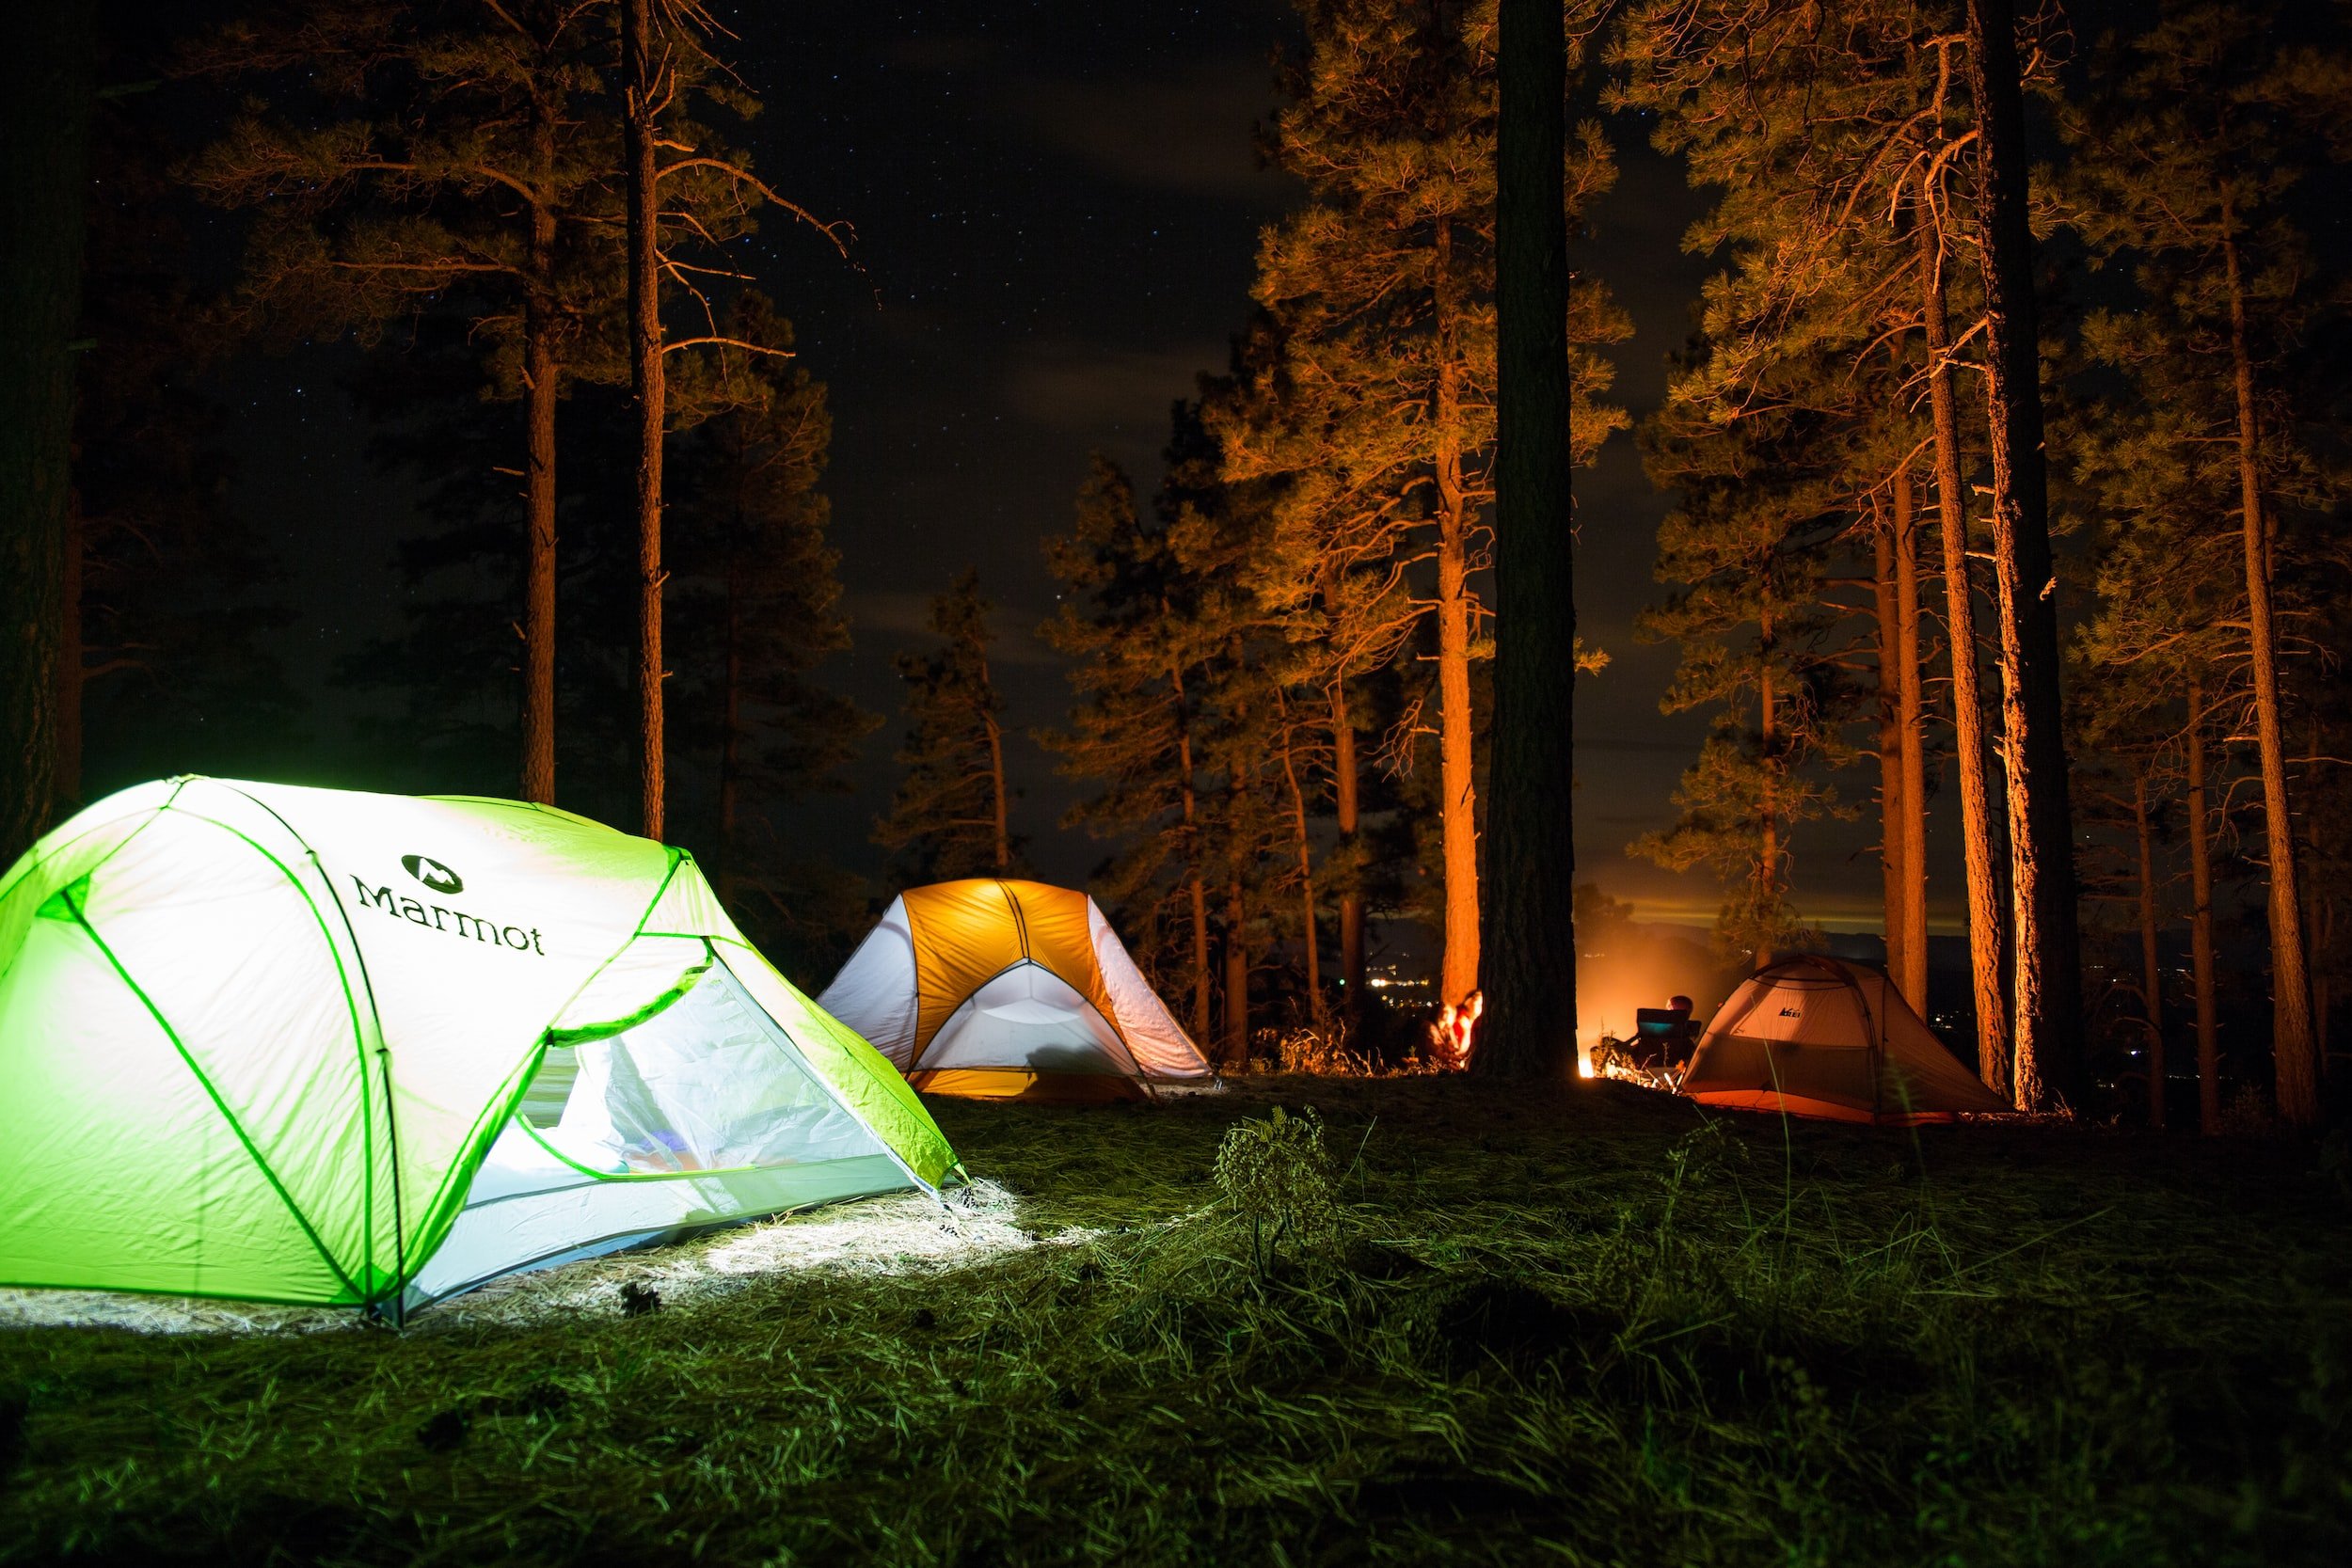 What You Should Know Before Going on a Camping Trip?